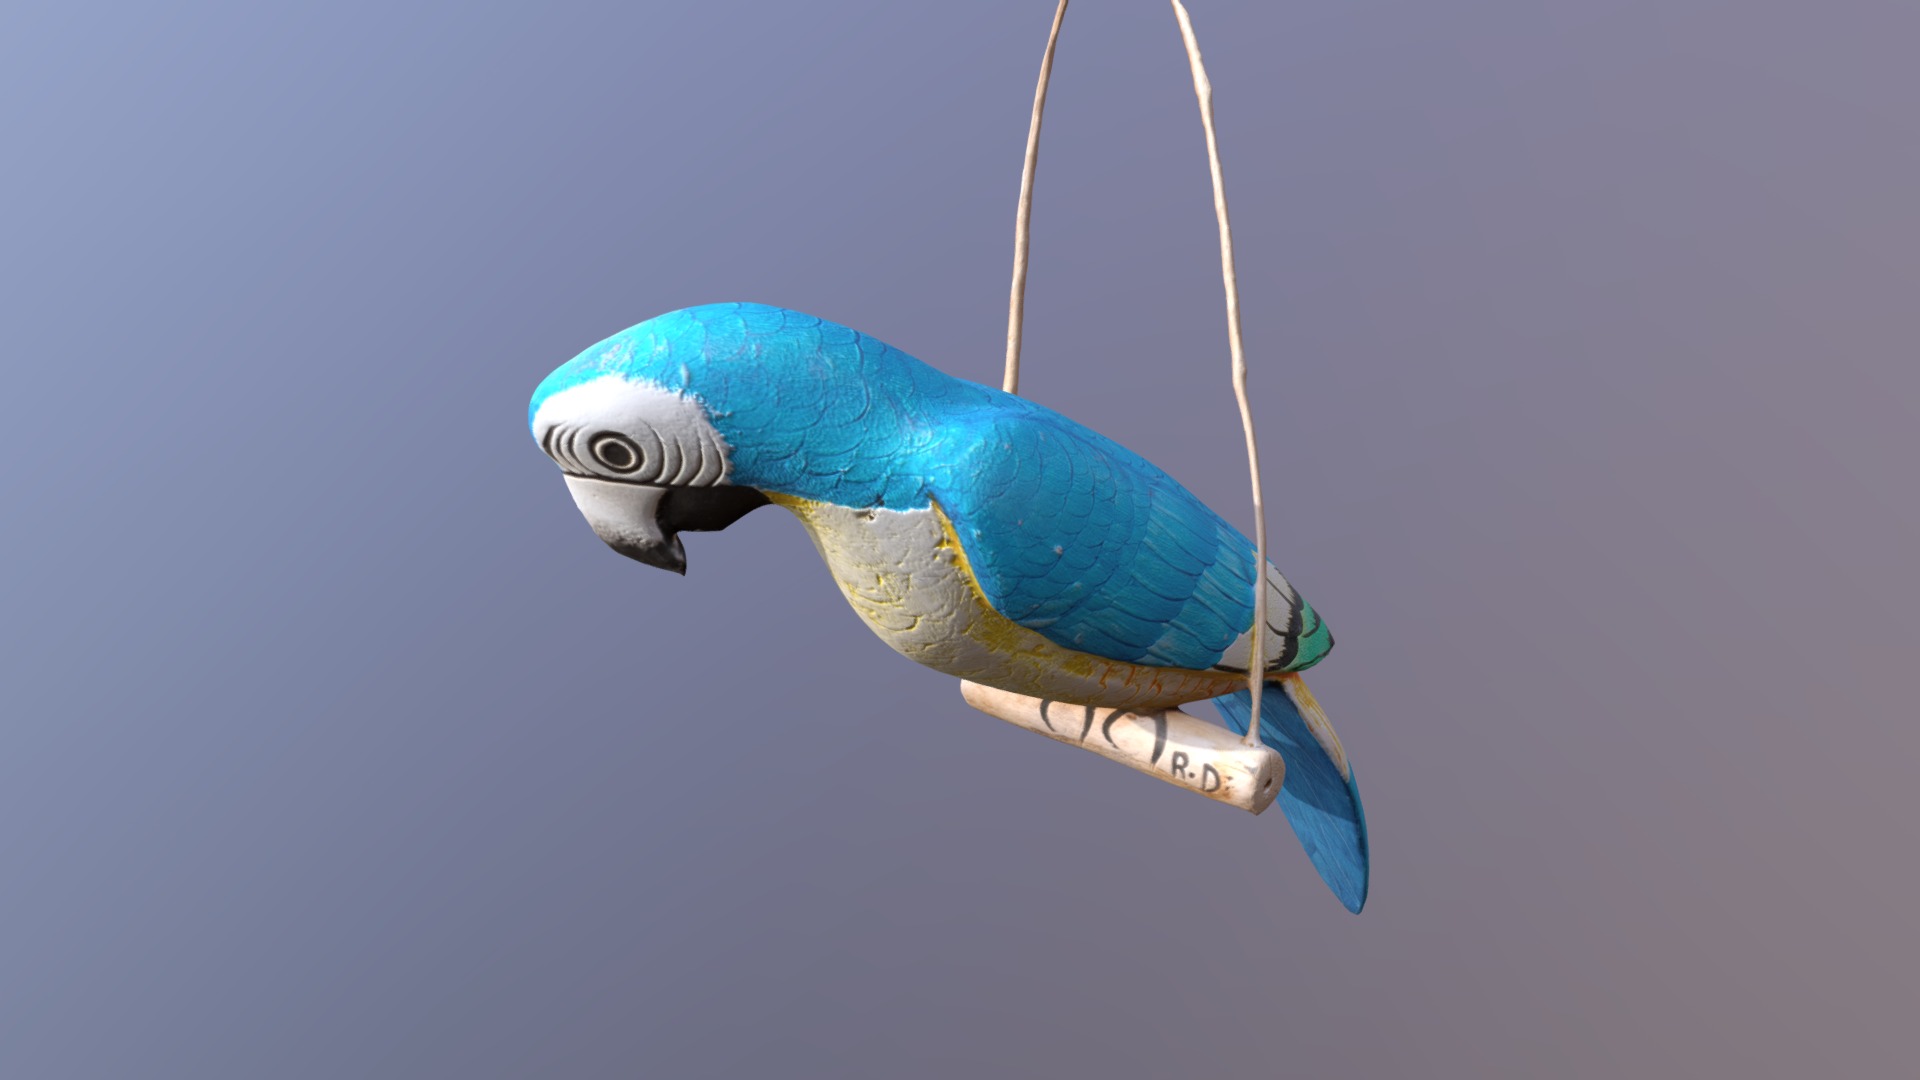 3D model Gobi The Blue Parrot - This is a 3D model of the Gobi The Blue Parrot. The 3D model is about a blue and white bird.